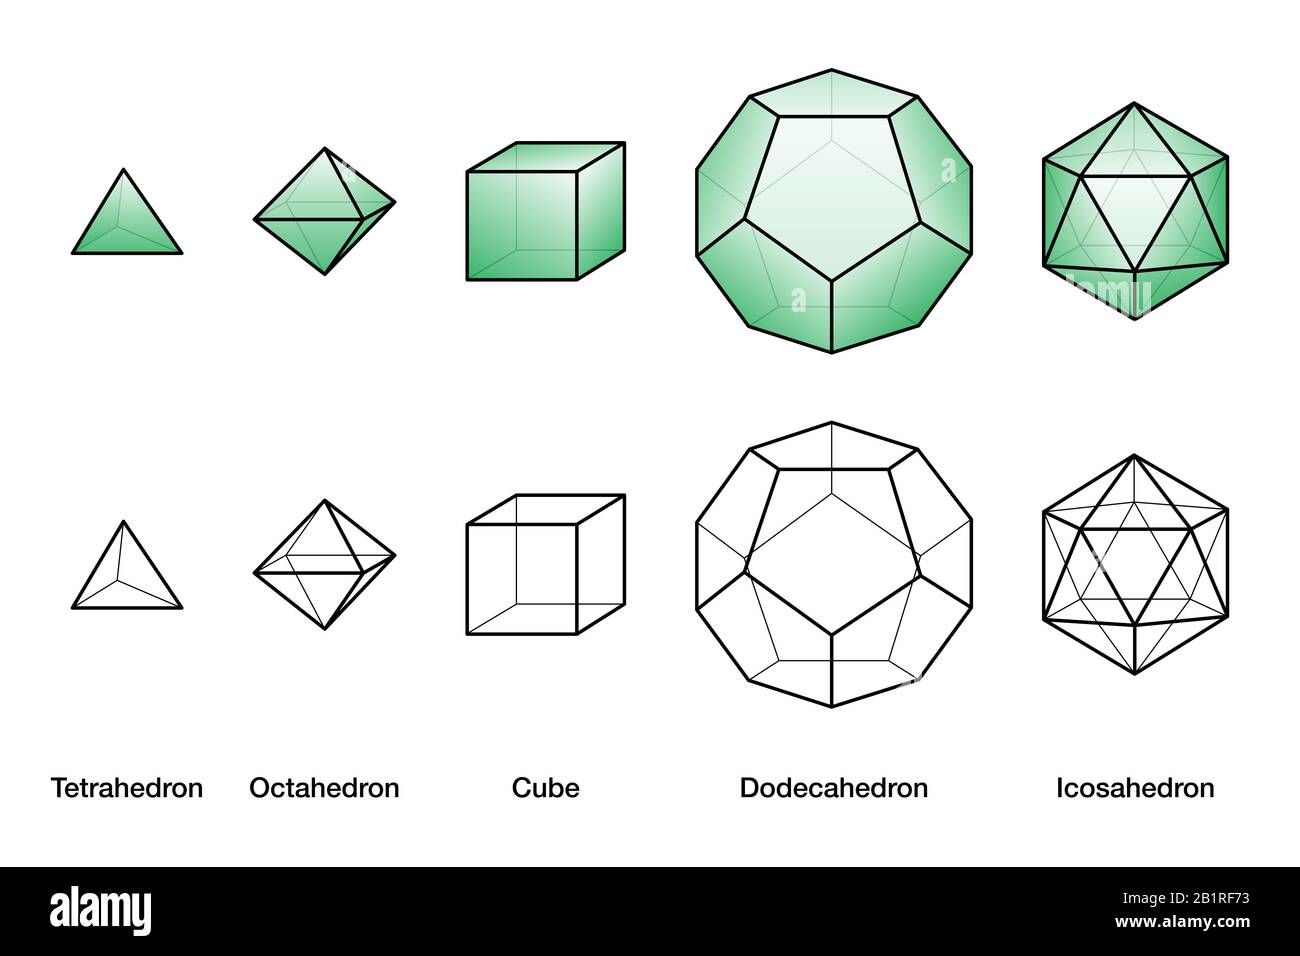 Green Platonic solids and wireframe models, all bodies with equal side lengths. Stock Photo